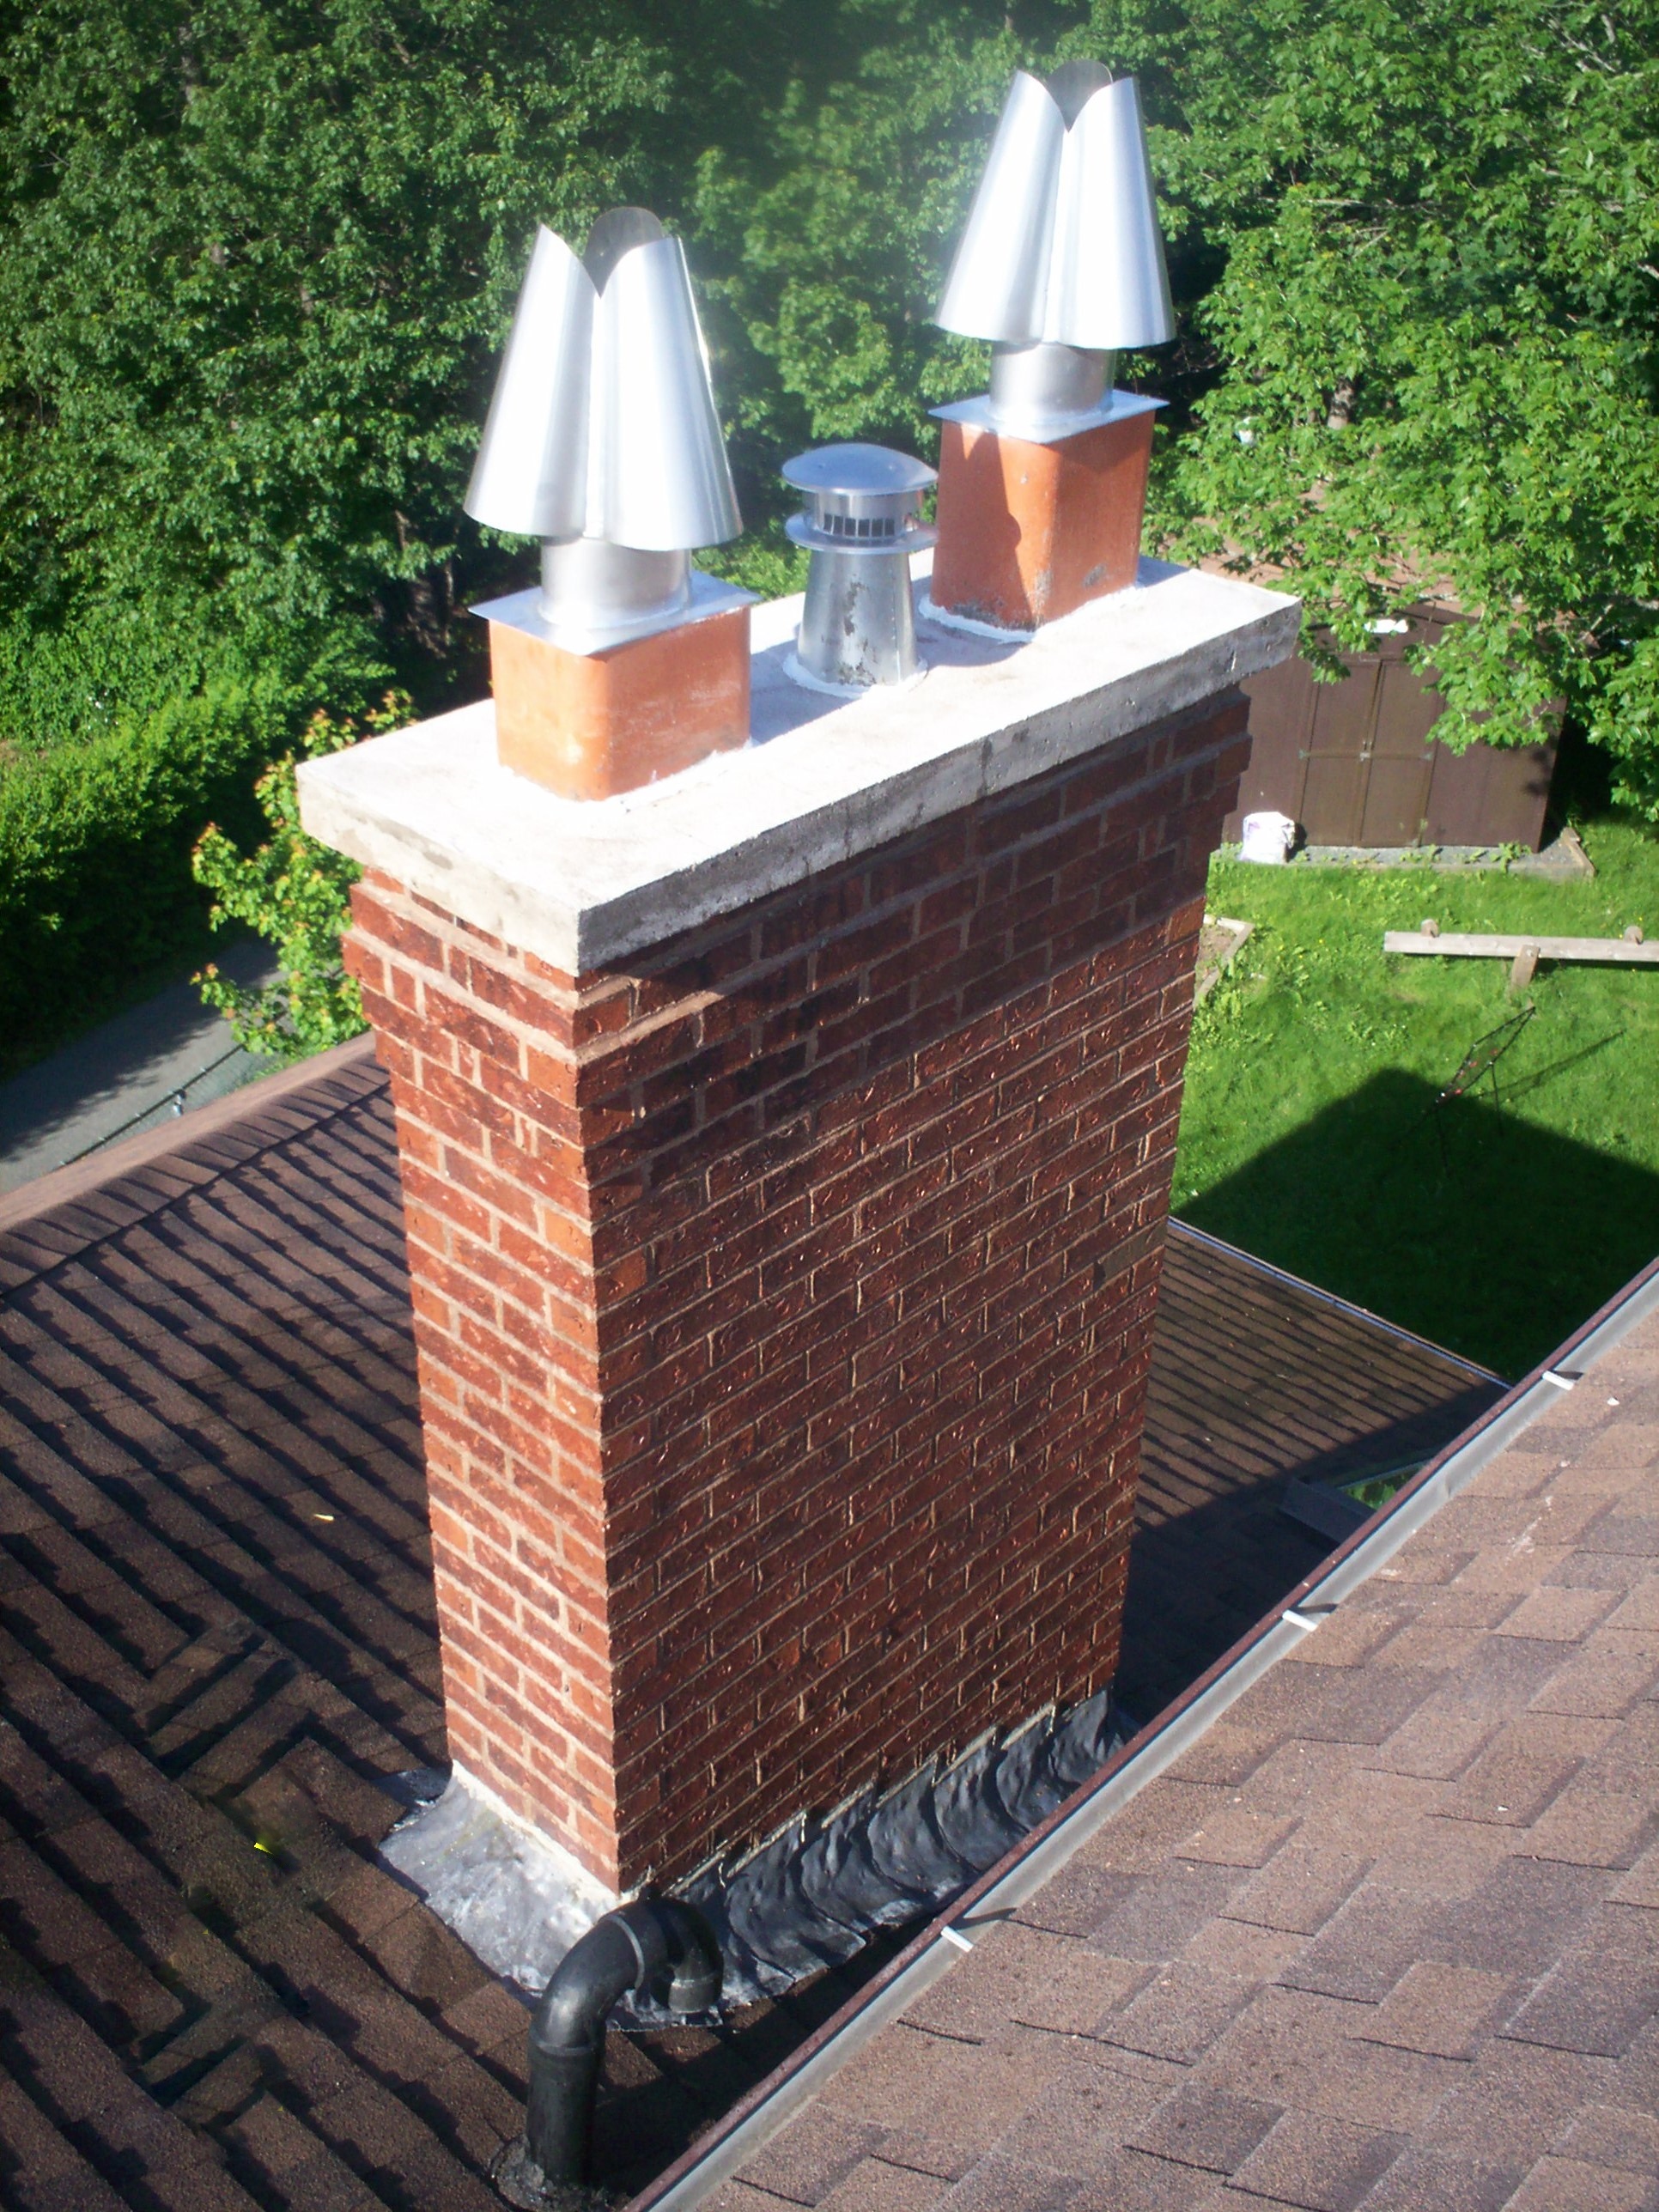 image of chimney repair-masonry chimney repair services completed in Halifax, NS by Pro Chimney Services based in Halifax, NS servicing all of the Halifax-Dartmouth Regional Municipality, Bedford, Sackville, Mount Uniacke, Hantsport, Windsor, Wolfville, Kentville, Chester Basin, Mahone Bay, Lunenburg, Bridgewater, Liverpool, Fall River, Wellington, Enfield, Elmsdale, Brookfield, Truro, Musquodoboit Harbour & surrounding areas.